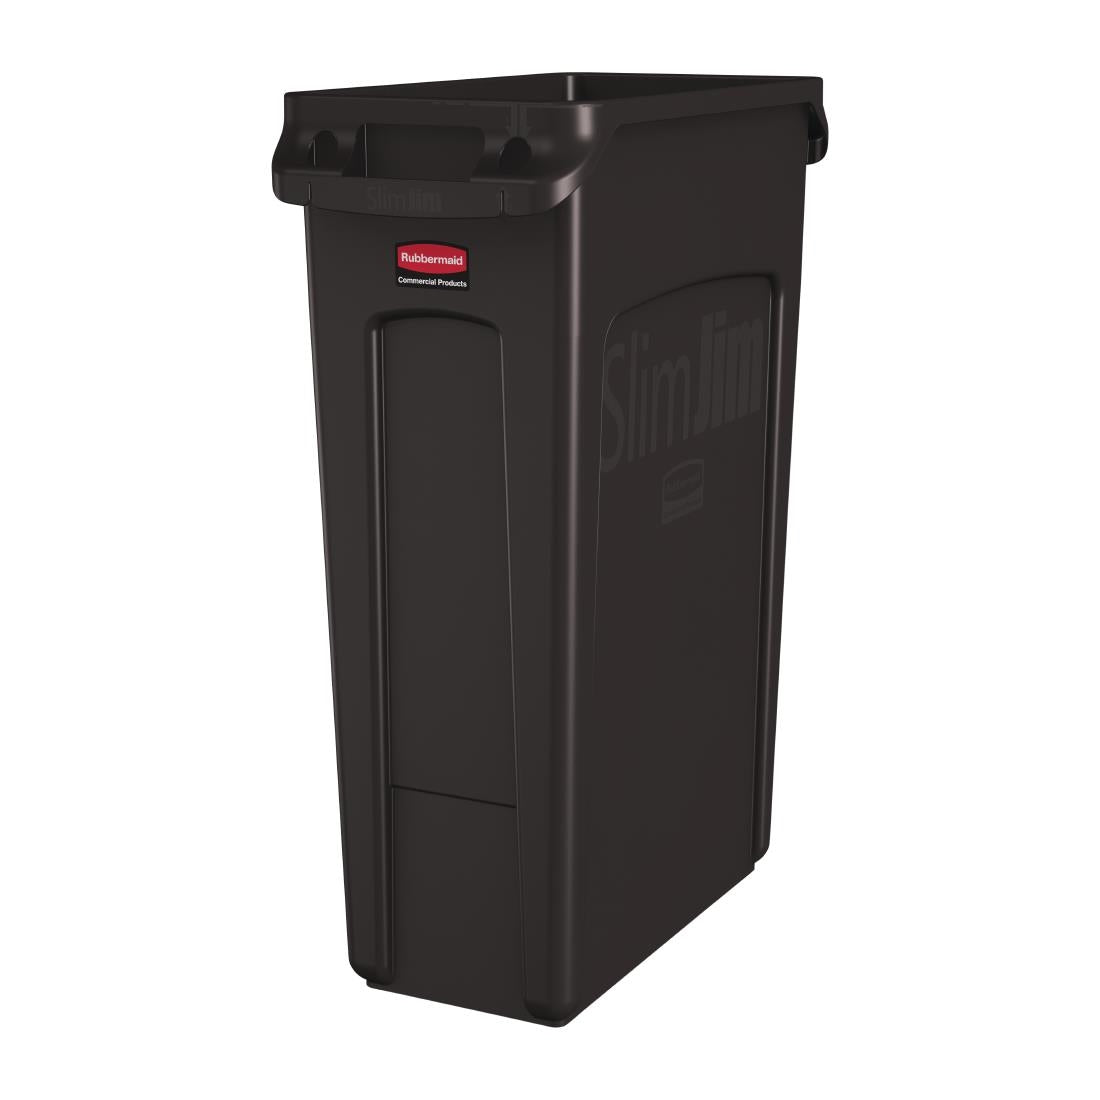 DY110 Rubbermaid Slim Jim Container With Venting Channels Brown 87Ltr JD Catering Equipment Solutions Ltd